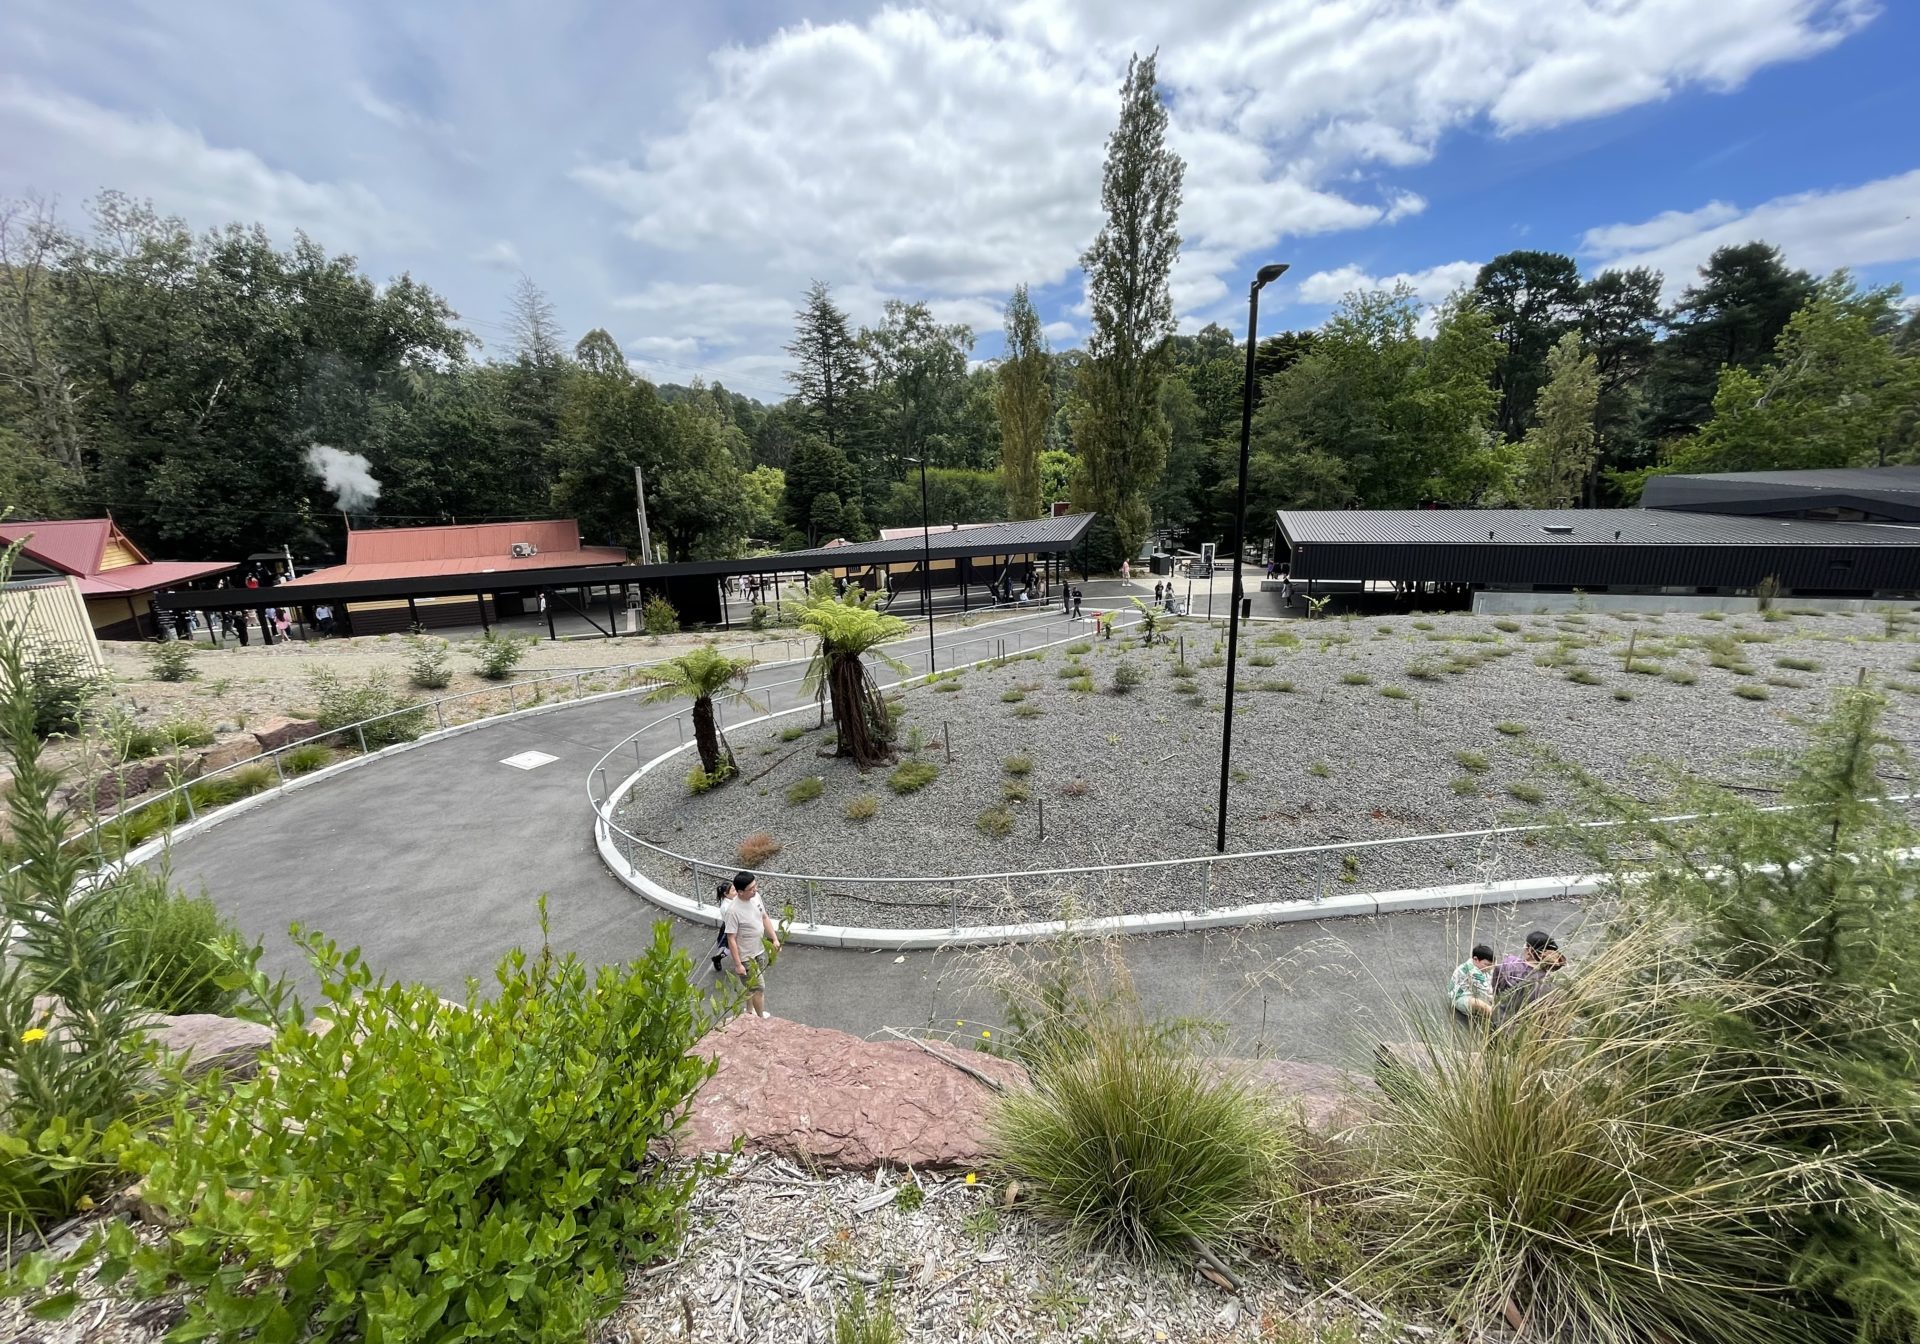 A paved pathway curves to the right down to main entrance of the Lakeside Visitor Centre. The modern centre can be seen on the right, with a black roof, while the heritage Lakeside station is on the left with warm yellow walls and red roofs. There are handrails along the path, which is on an incline.